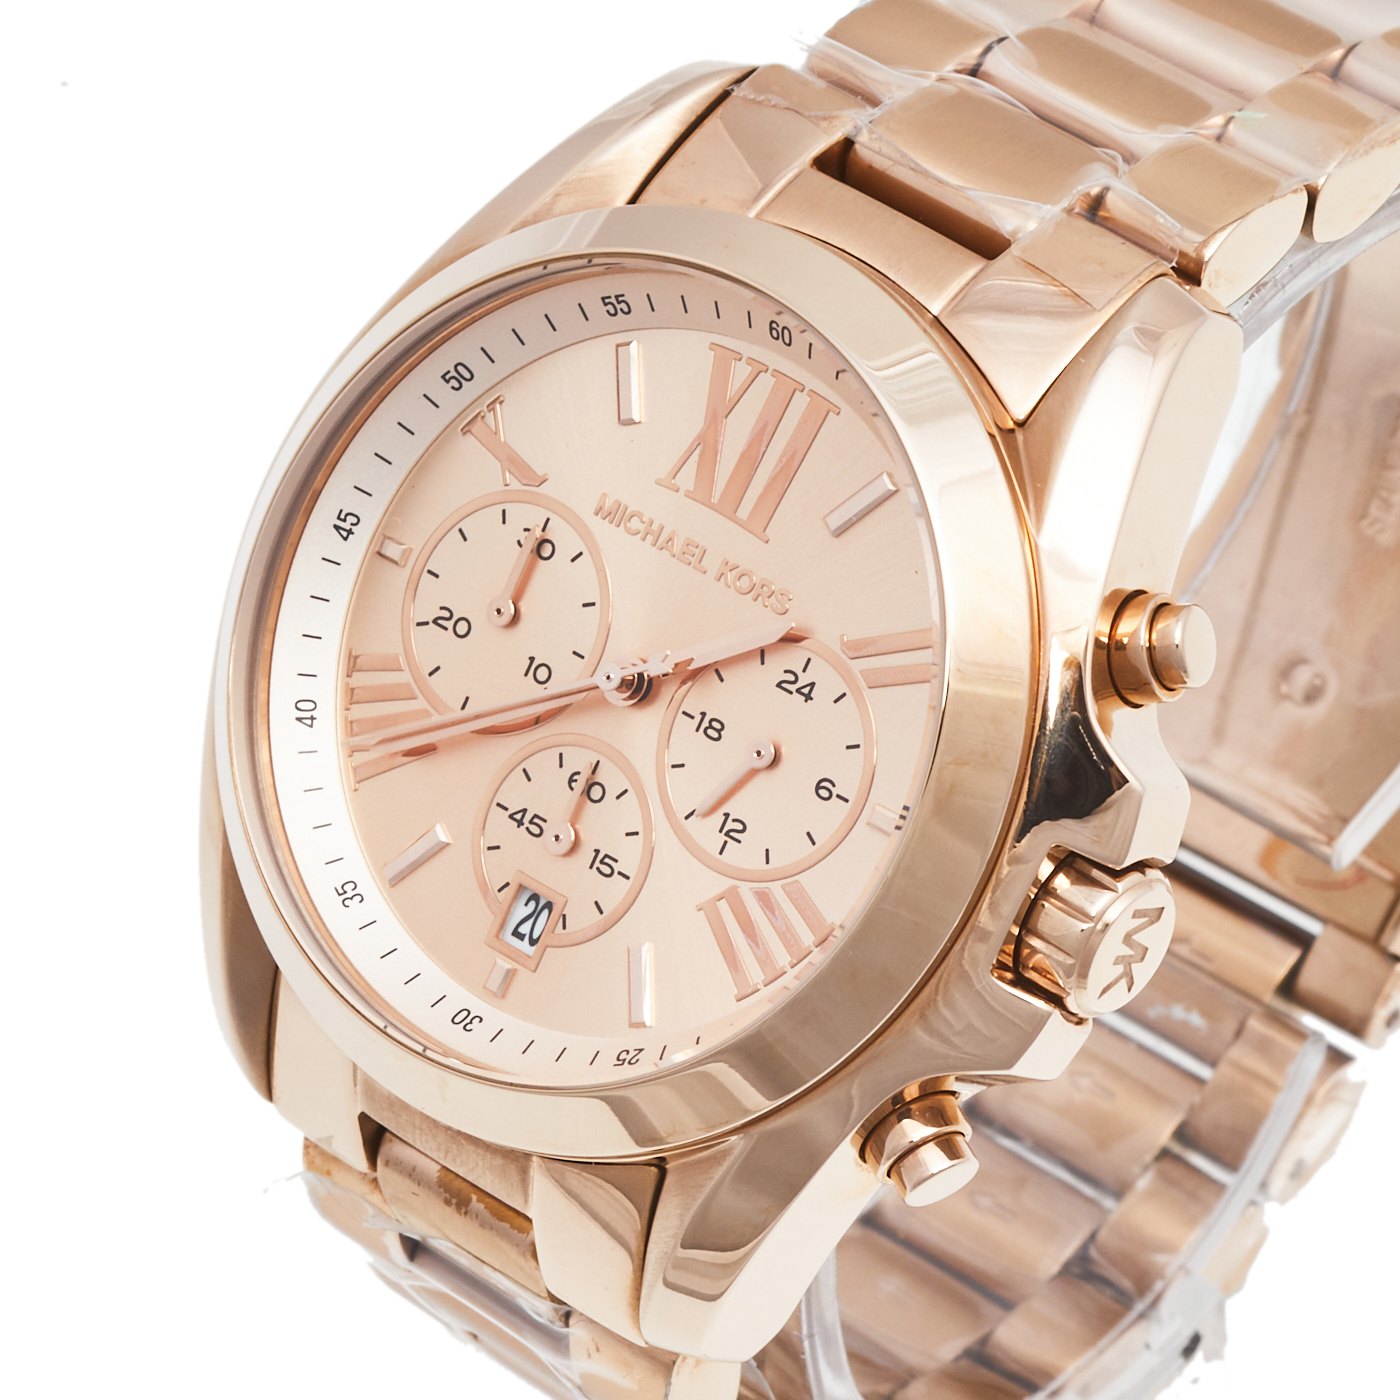 

Michael Kors Champagne Rose Gold Plated Stainless Steel Bradshaw MK-5503 Women's Wristwatch